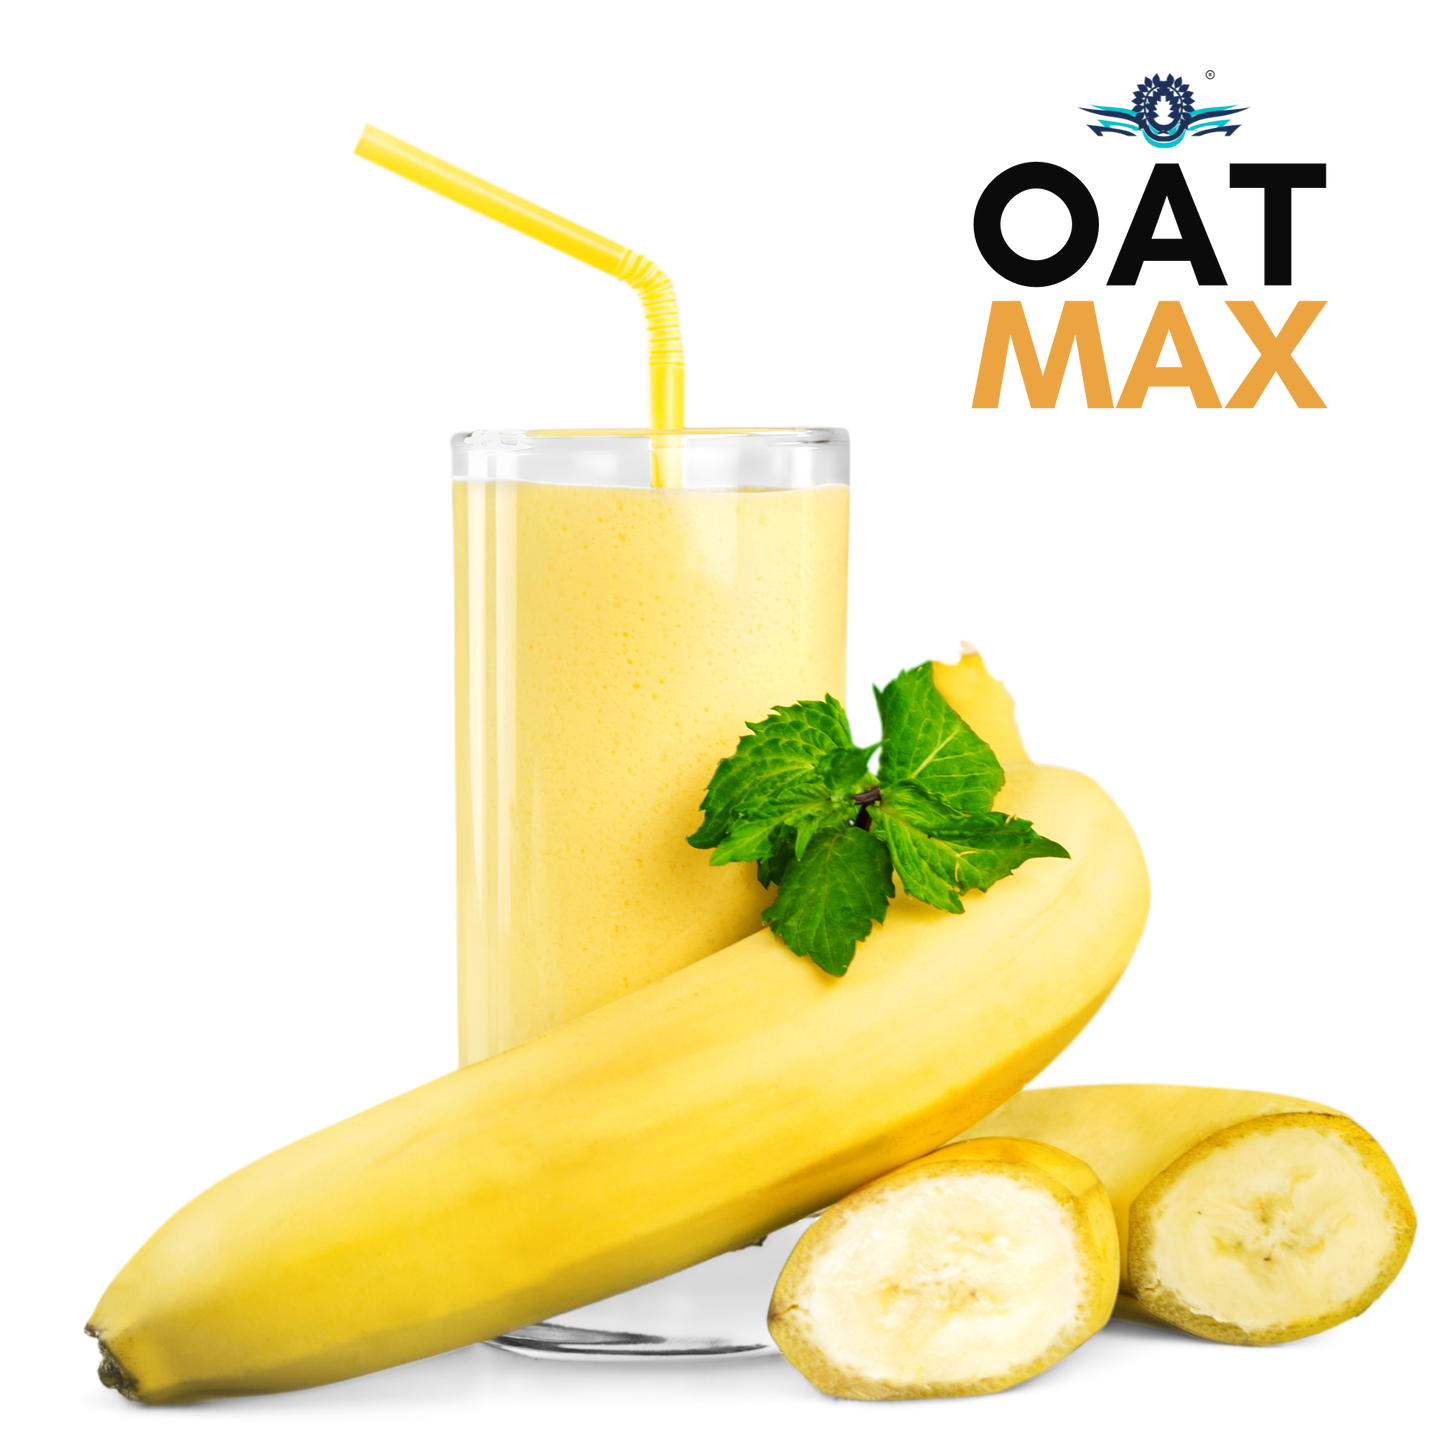 OATMAX BANANA SMOOTHIE PREMIX – BANANA DRINK POWDER | NATURAL POWDERS AND OATS | INSTANT MILK OR WATER MIX | NO ADDED PRESERVATIVES OR FLAVOURS